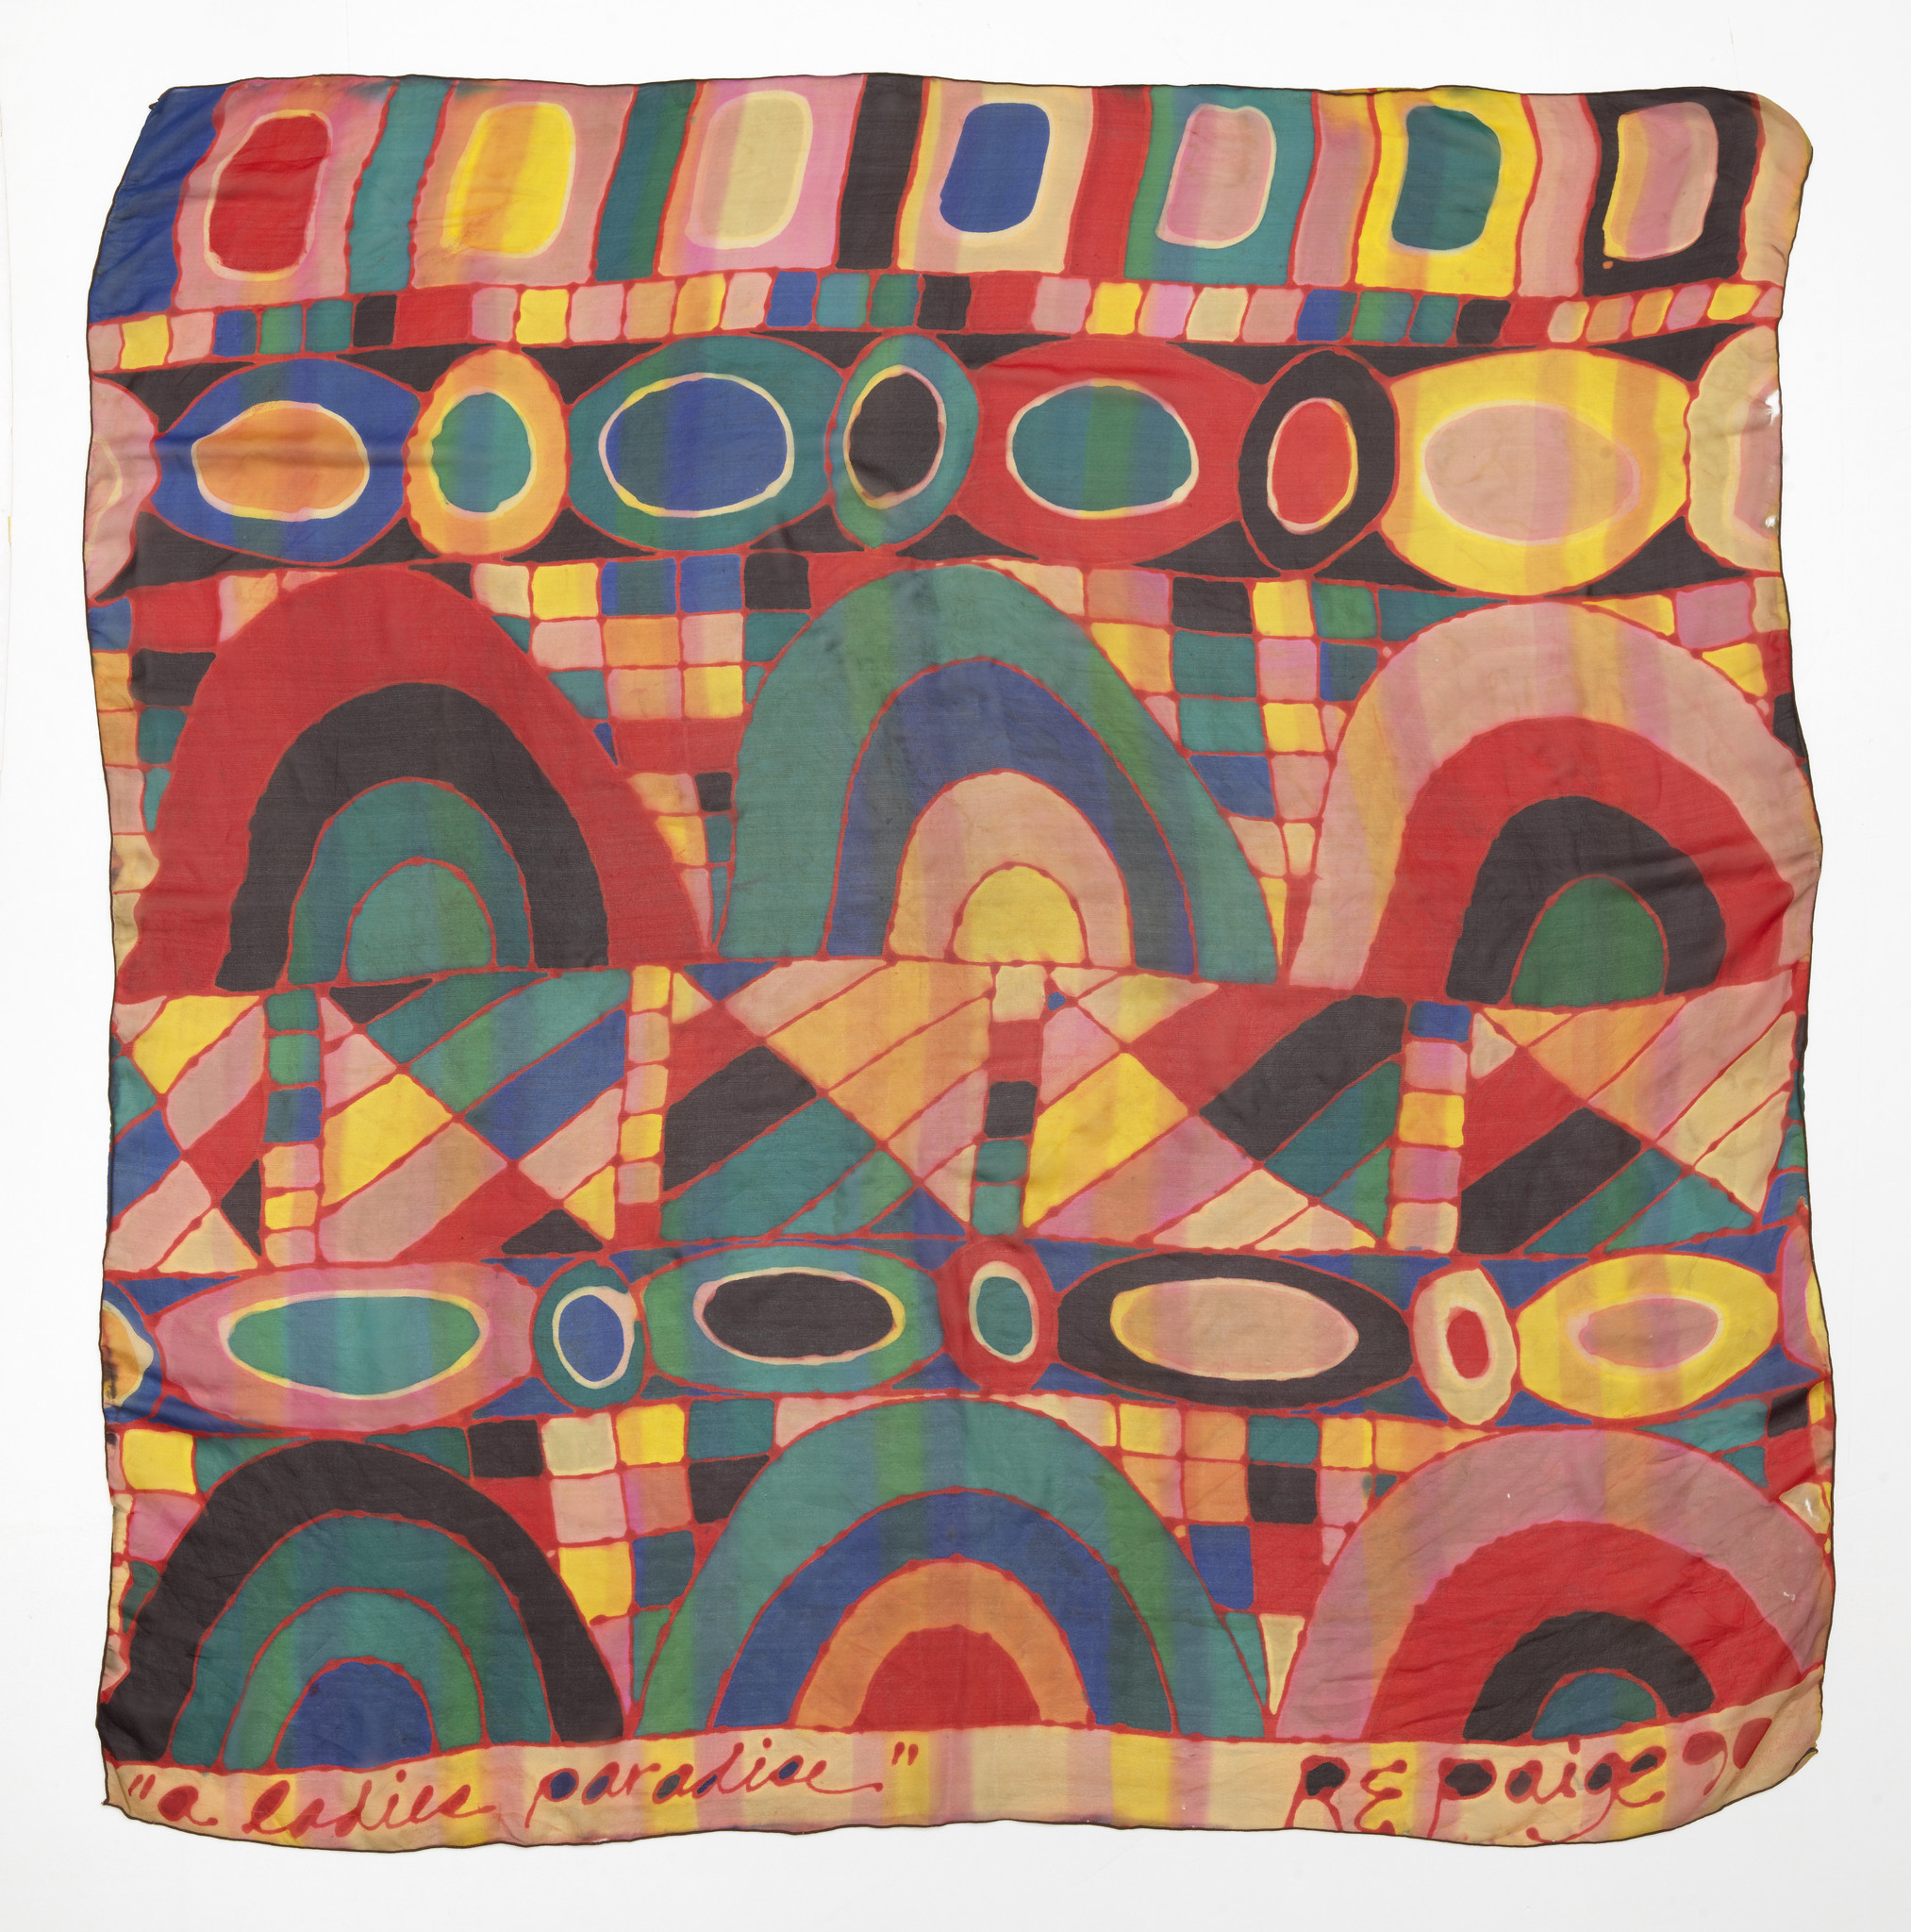 A multi-colored, square textile with geometric shapes.